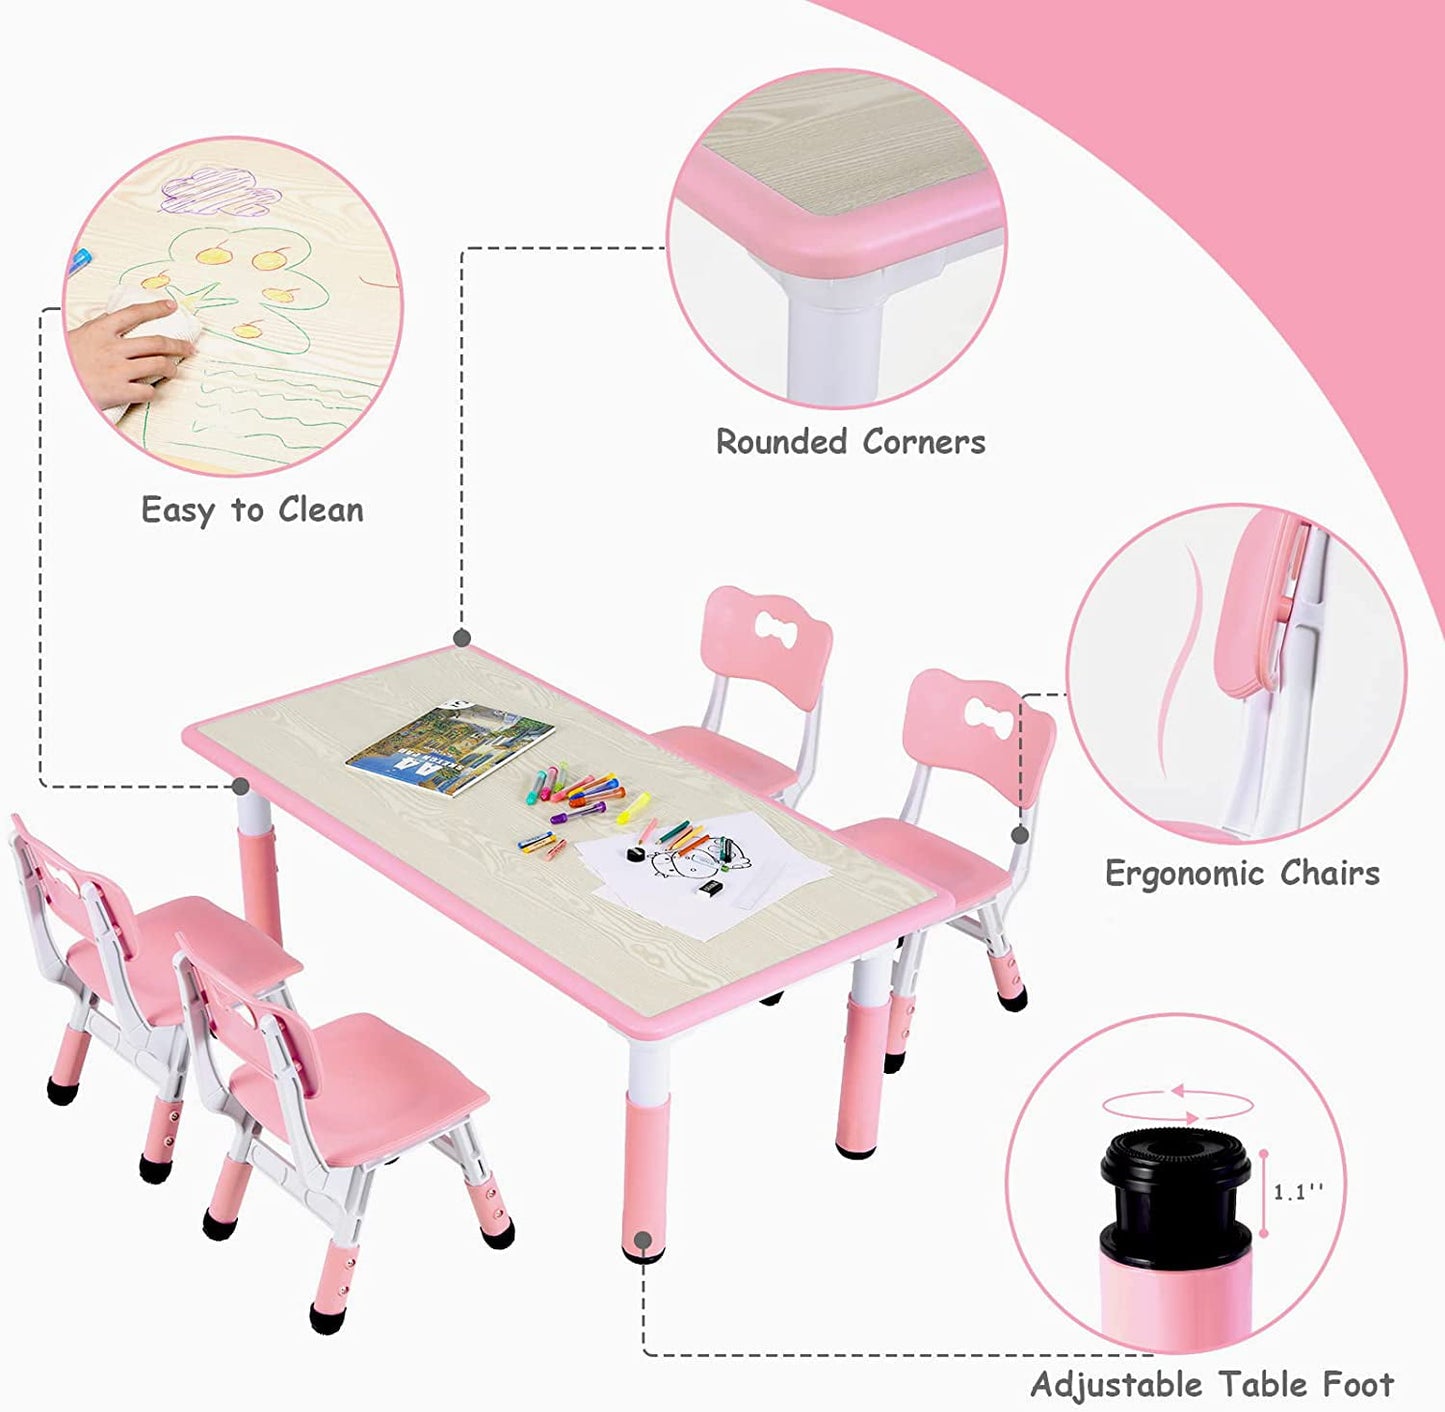 Arlopu Kids Table and 4 Chairs Set, Adjustable Height, Ideal for Arts & Crafts, Snack Time, Homeschooling, Homework